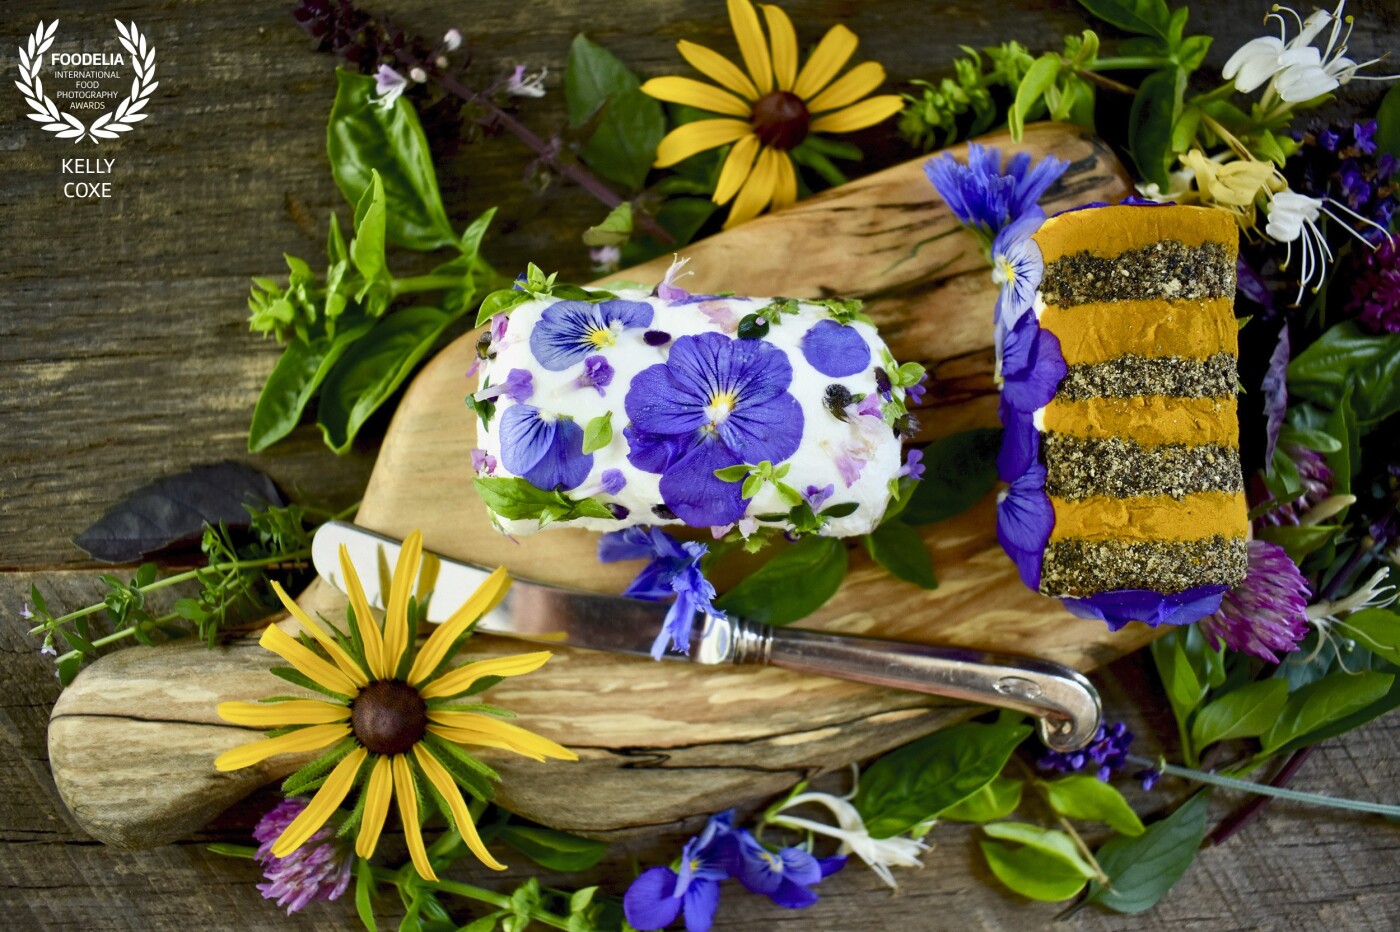 Just showing the humble goat cheese a little love with lemon, local honey, turmeric, black peppercorns, and beautiful edible flowers.